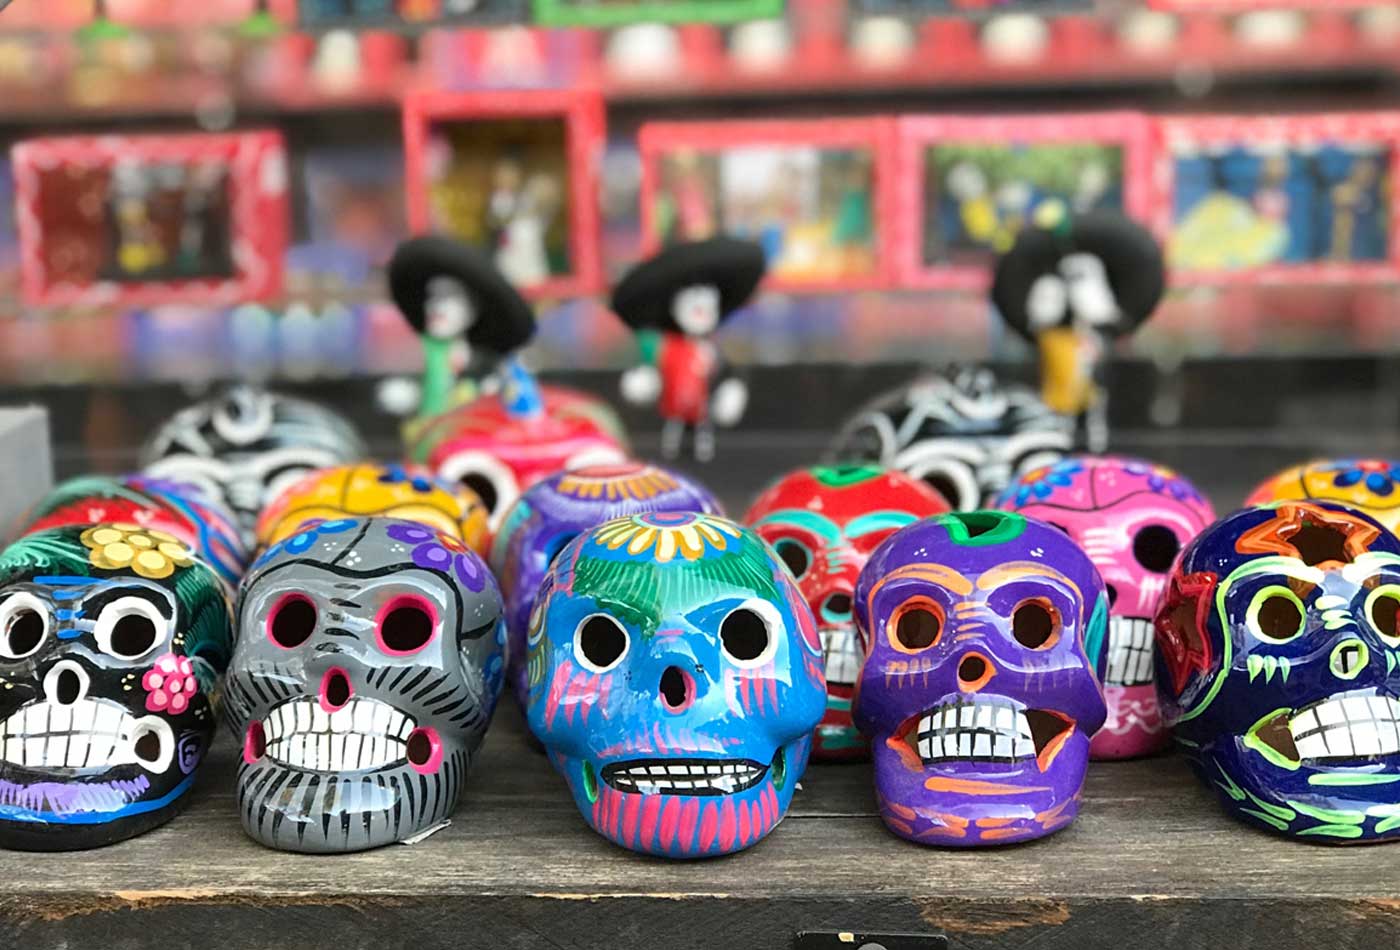 shows an image of day of the dead heads in a shop